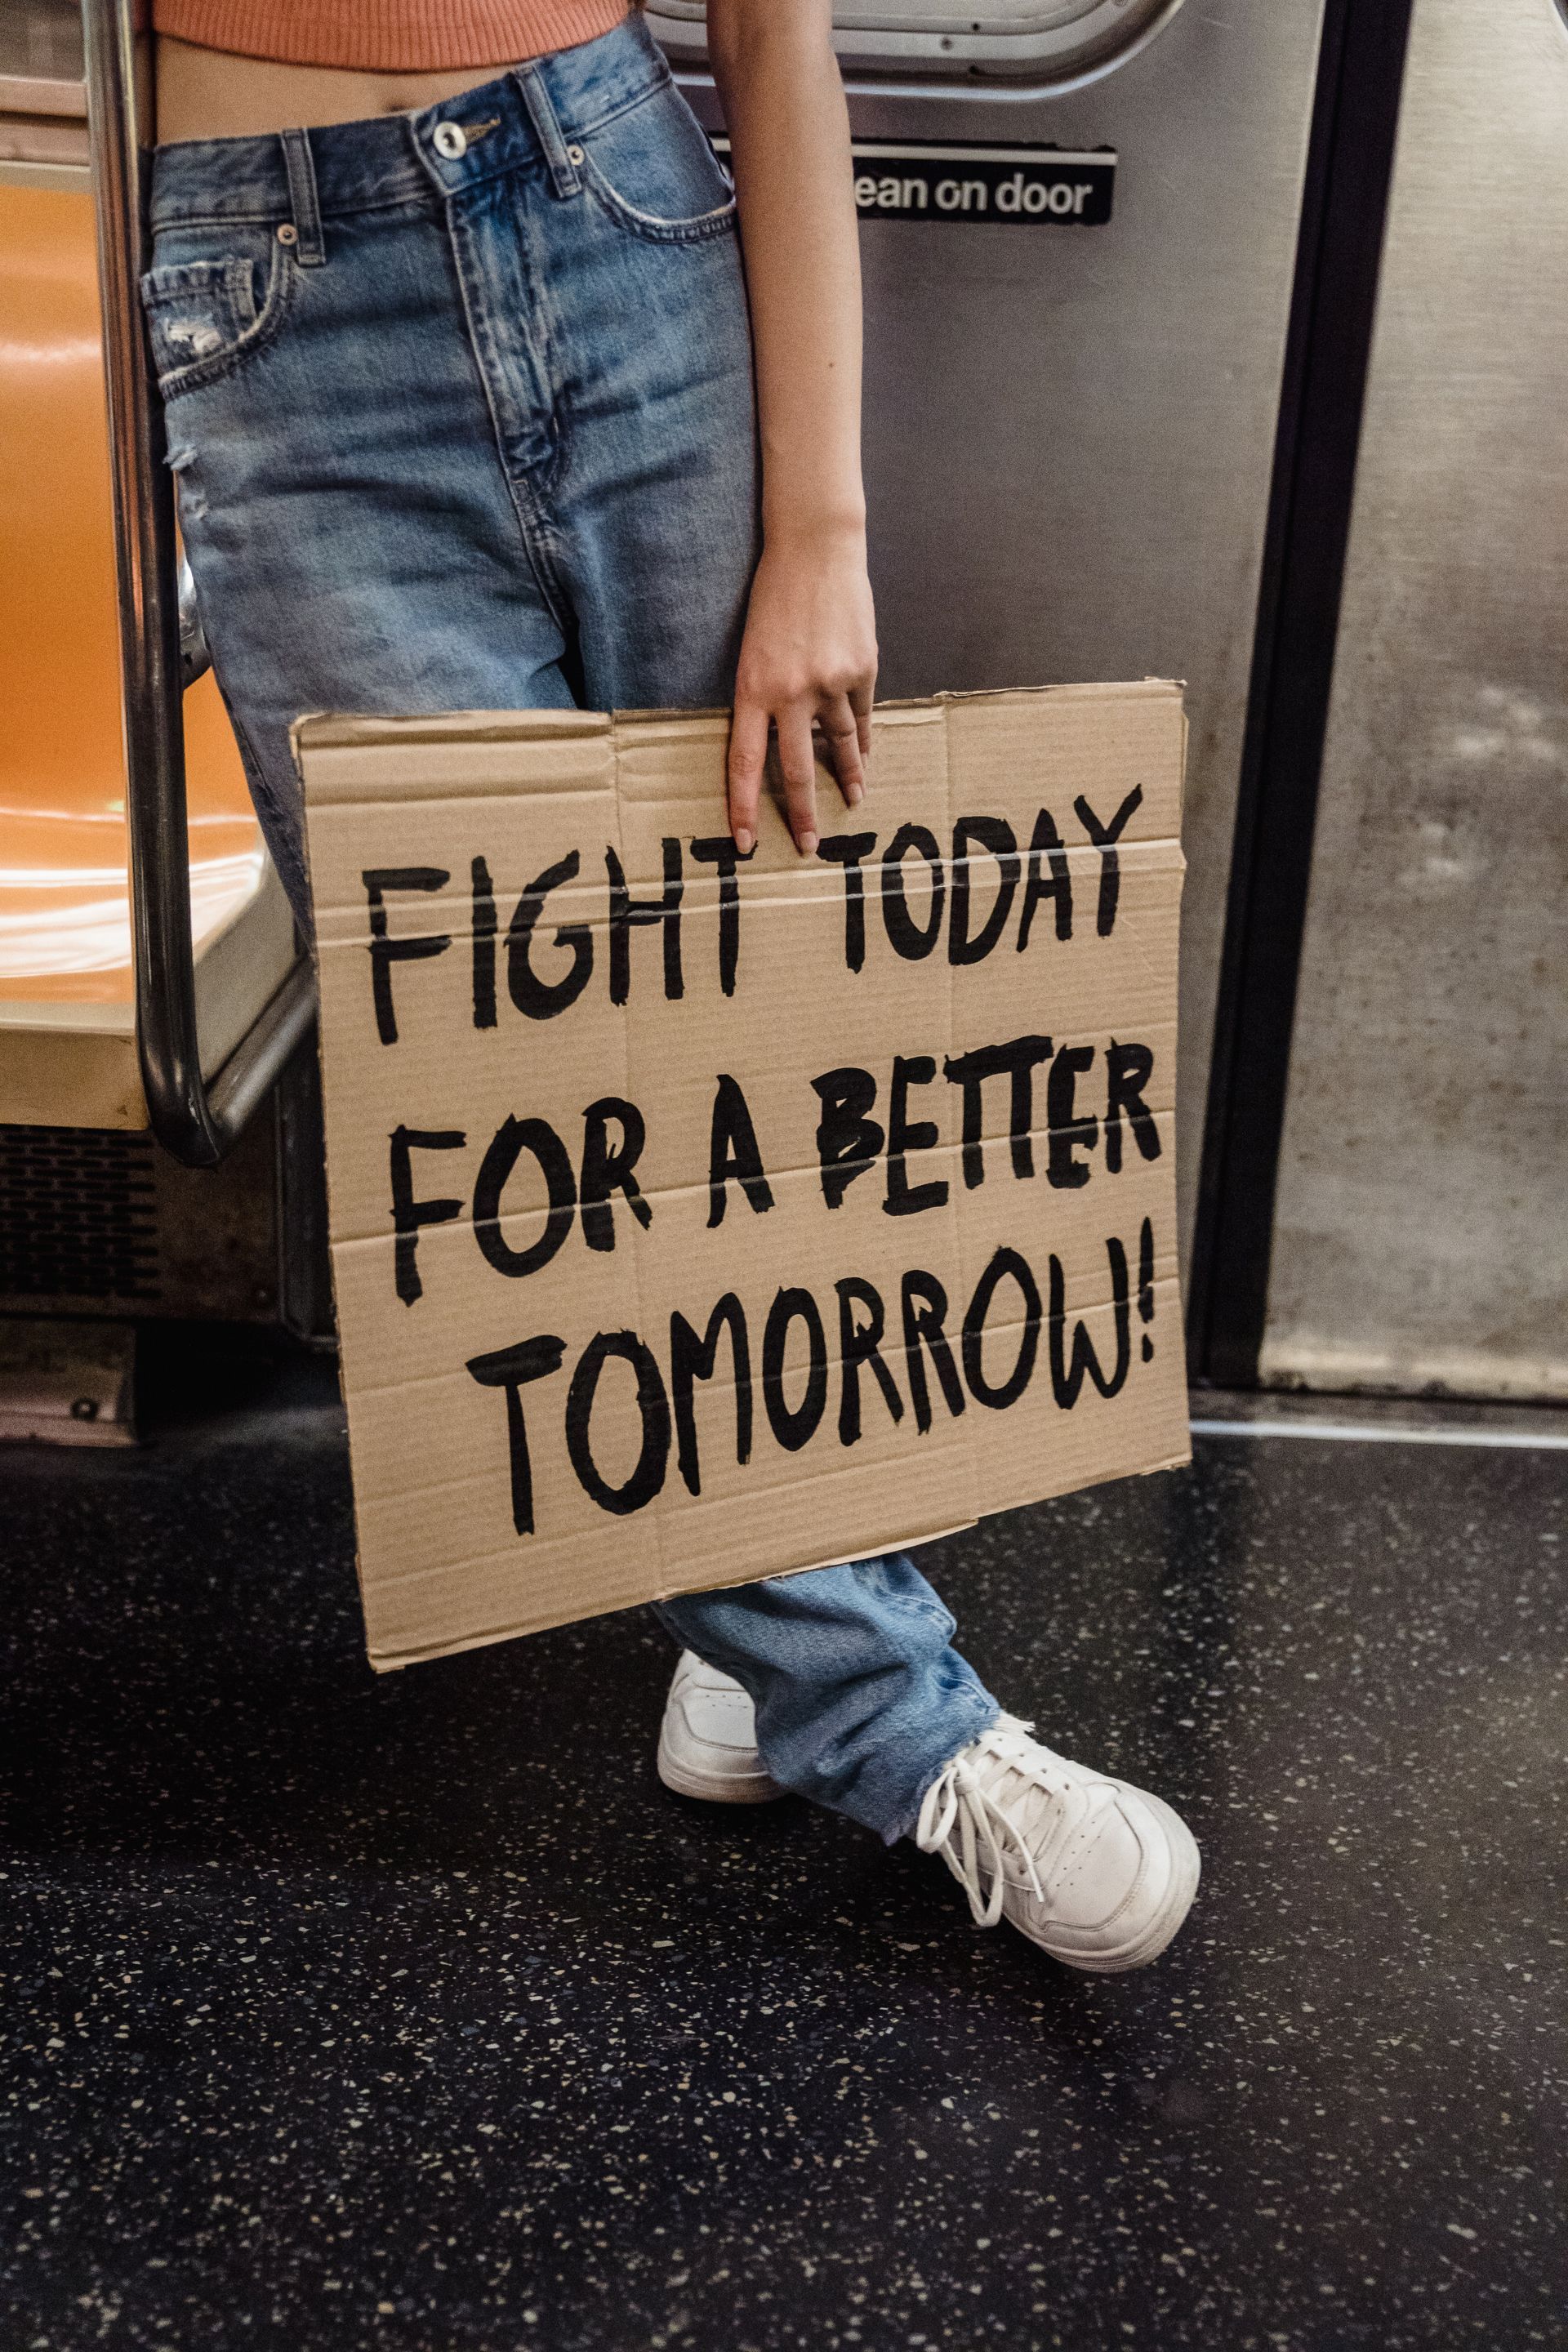 A young woman waits on a train, holding a sign which declares 'Fight today for a better tomorrow.'